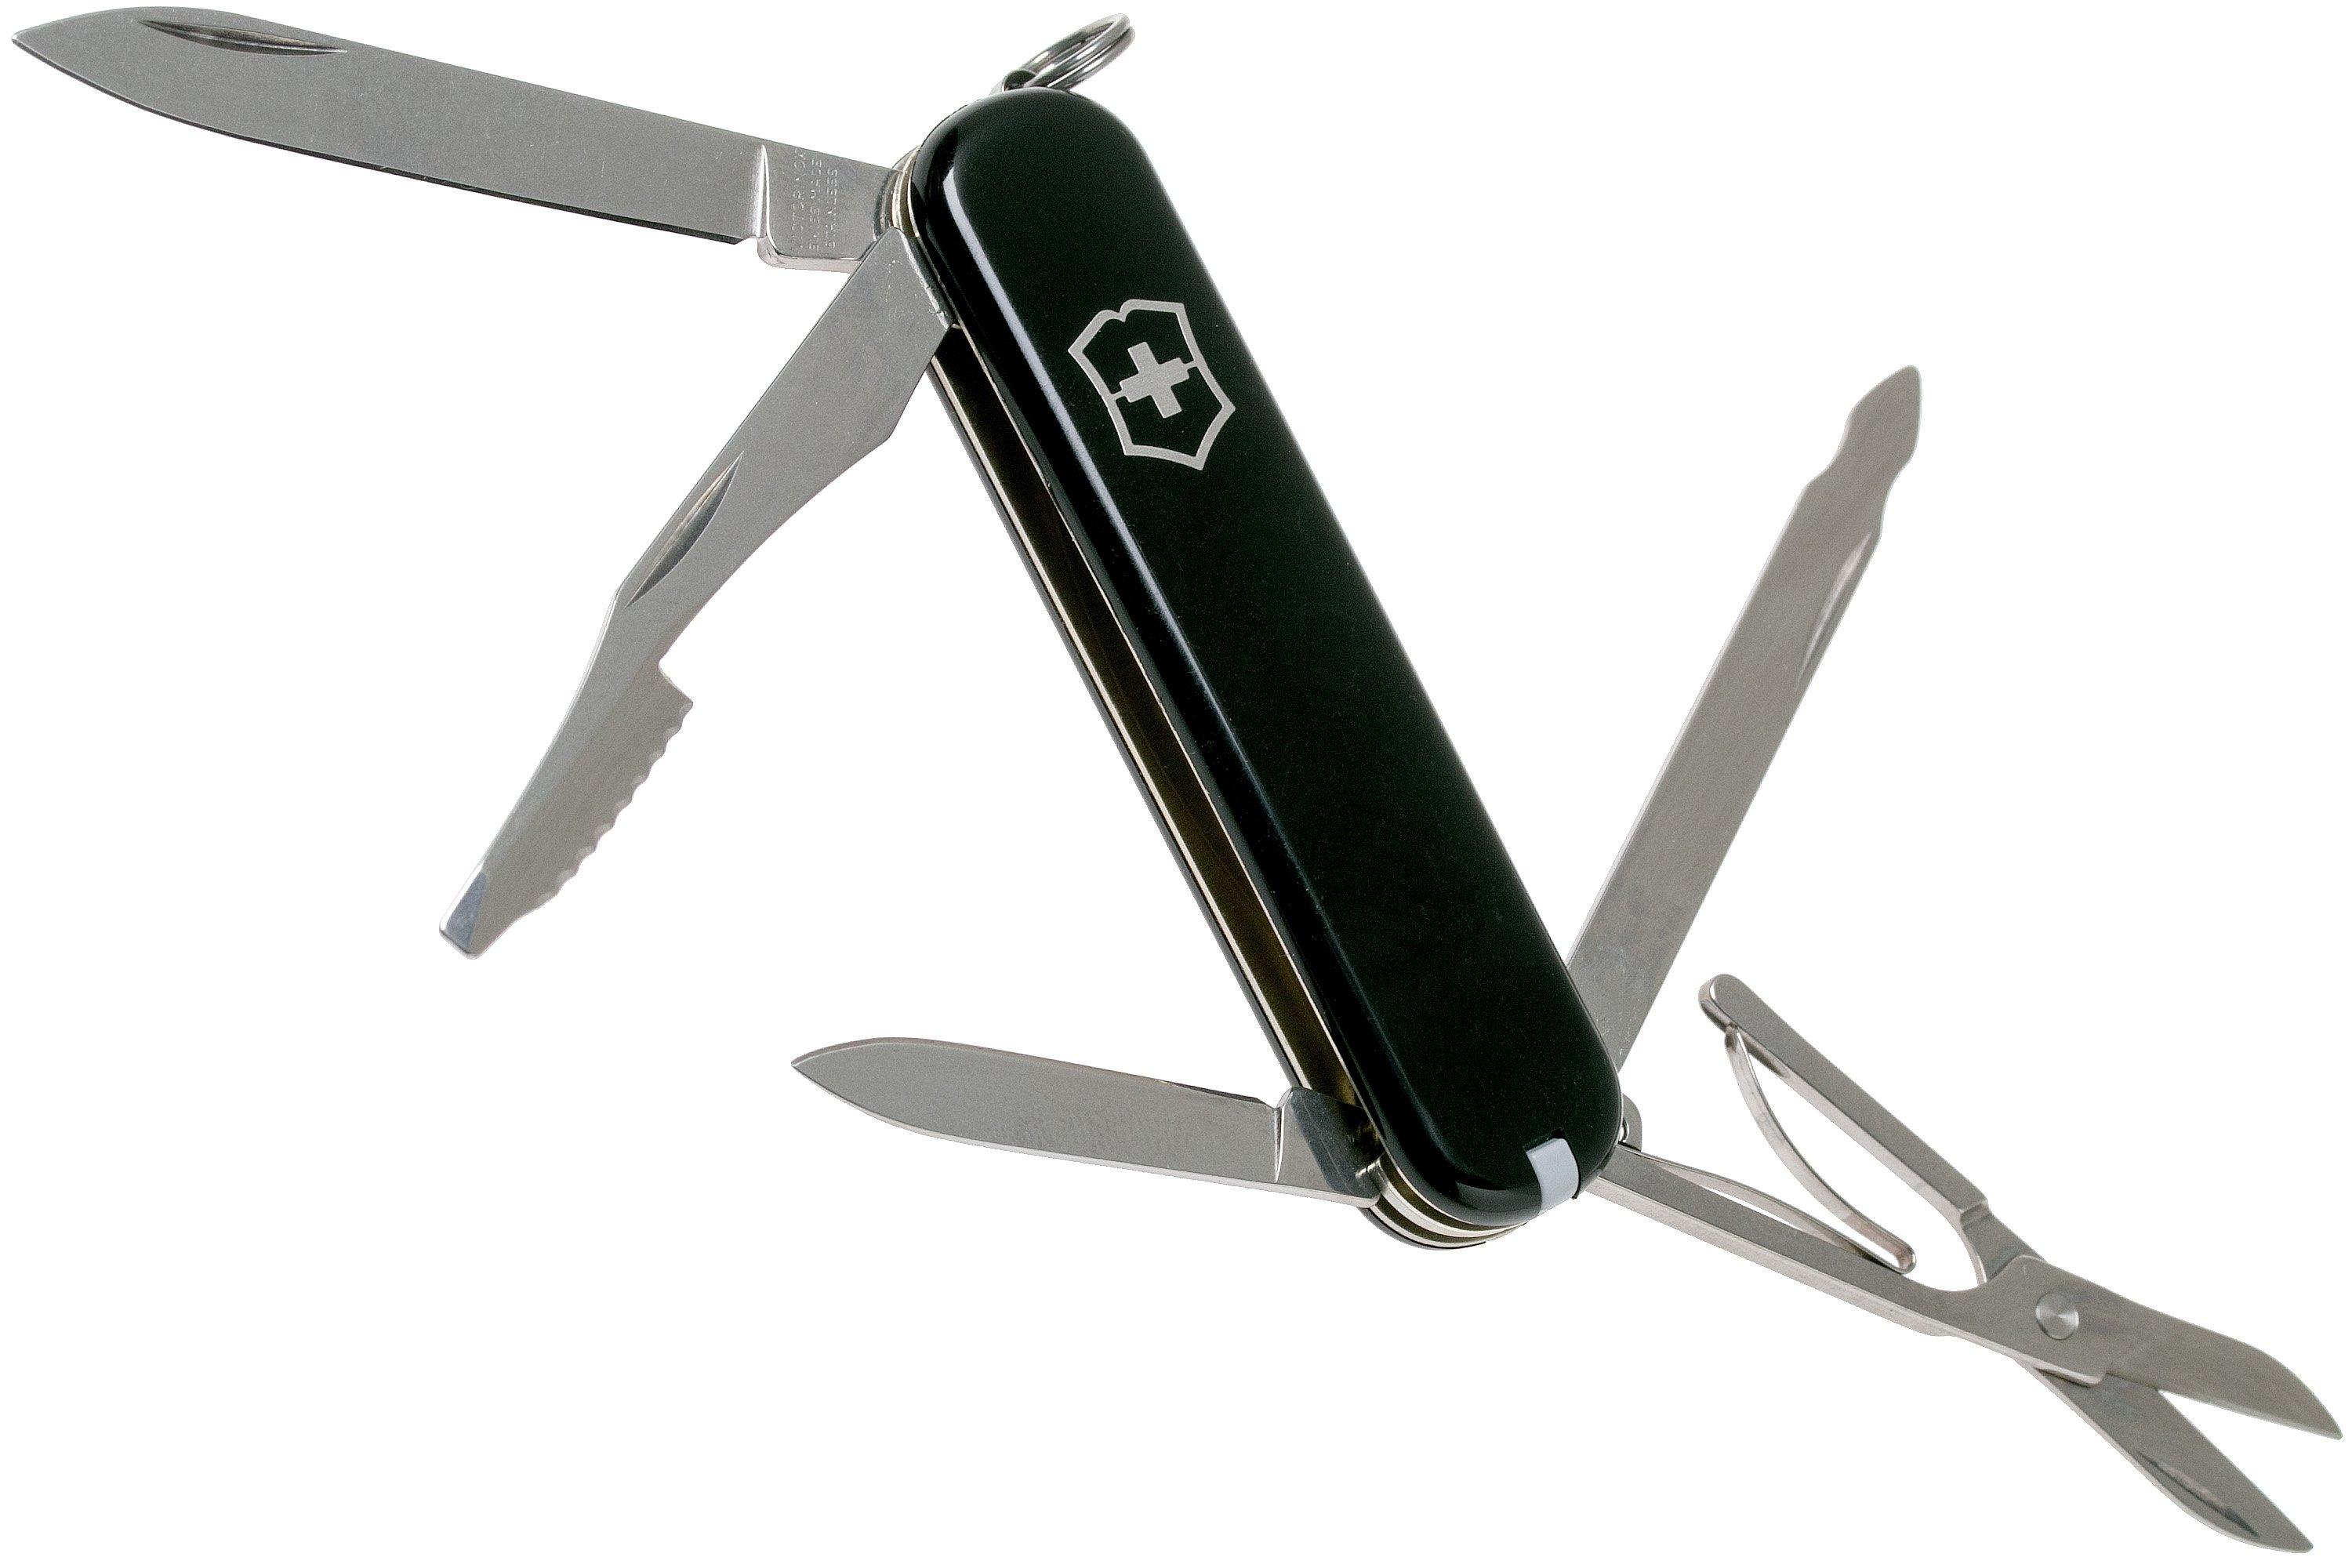  Victorinox Swiss Army Executive Pocket Knife (Black), One Size  : Folding Camping Knives : Sports & Outdoors